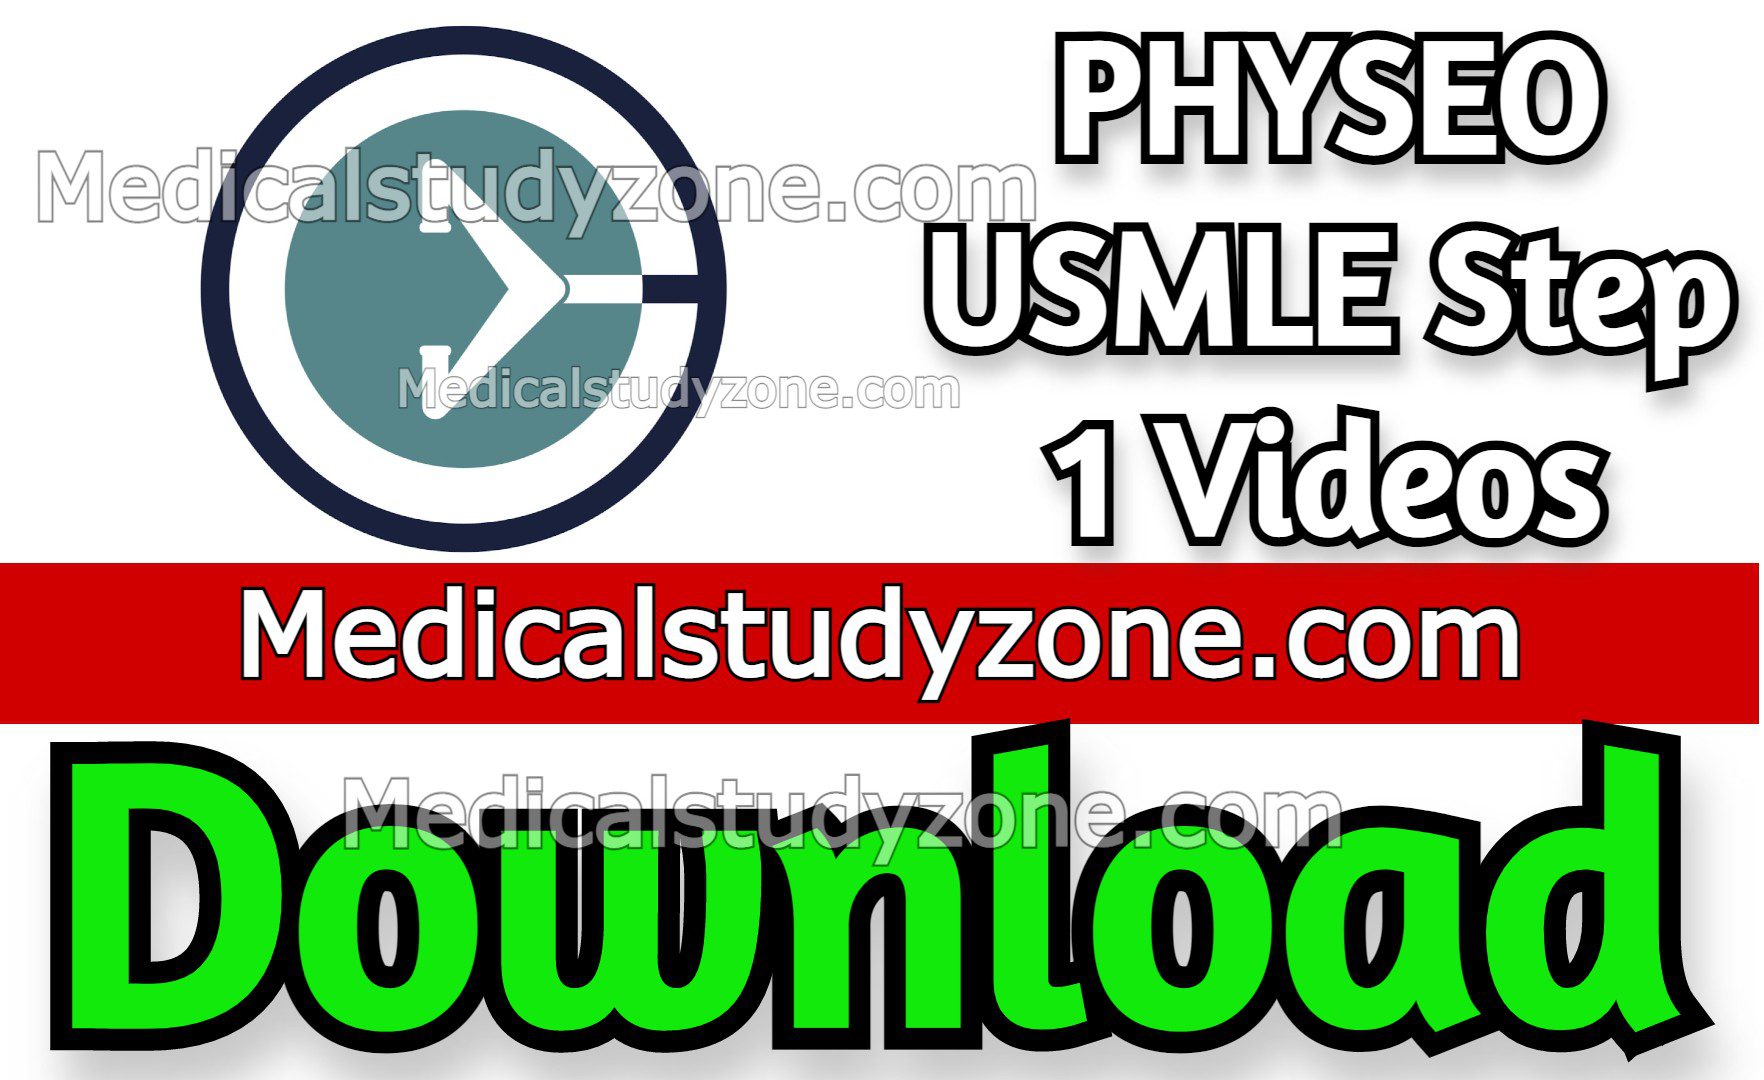 PHYSEO USMLE Step 1 2022 Videos Free Download